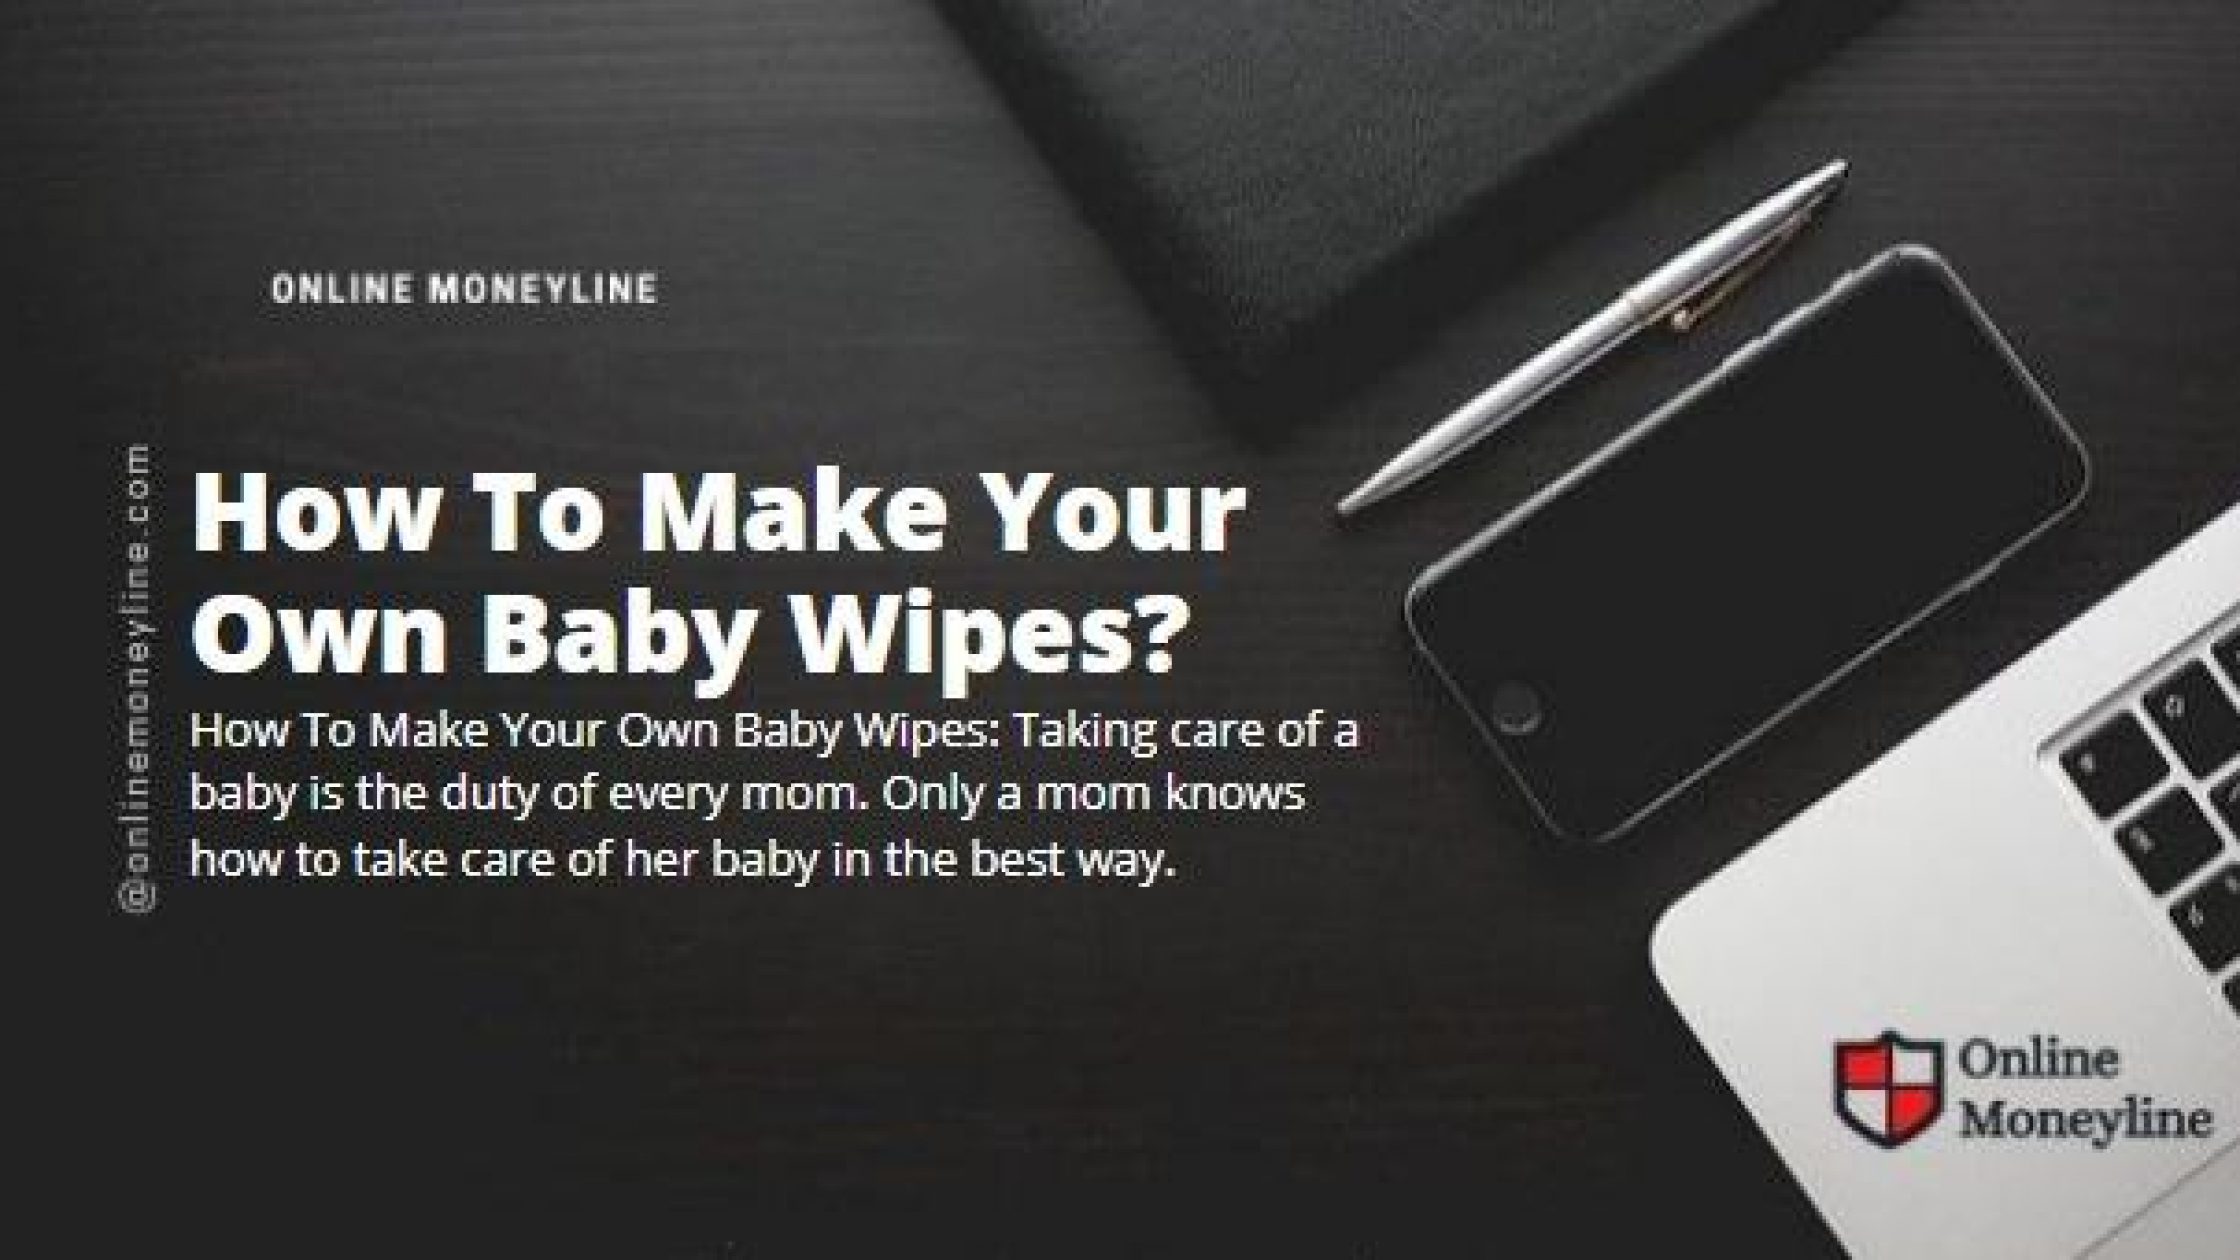 How To Make Your Own Baby Wipes?